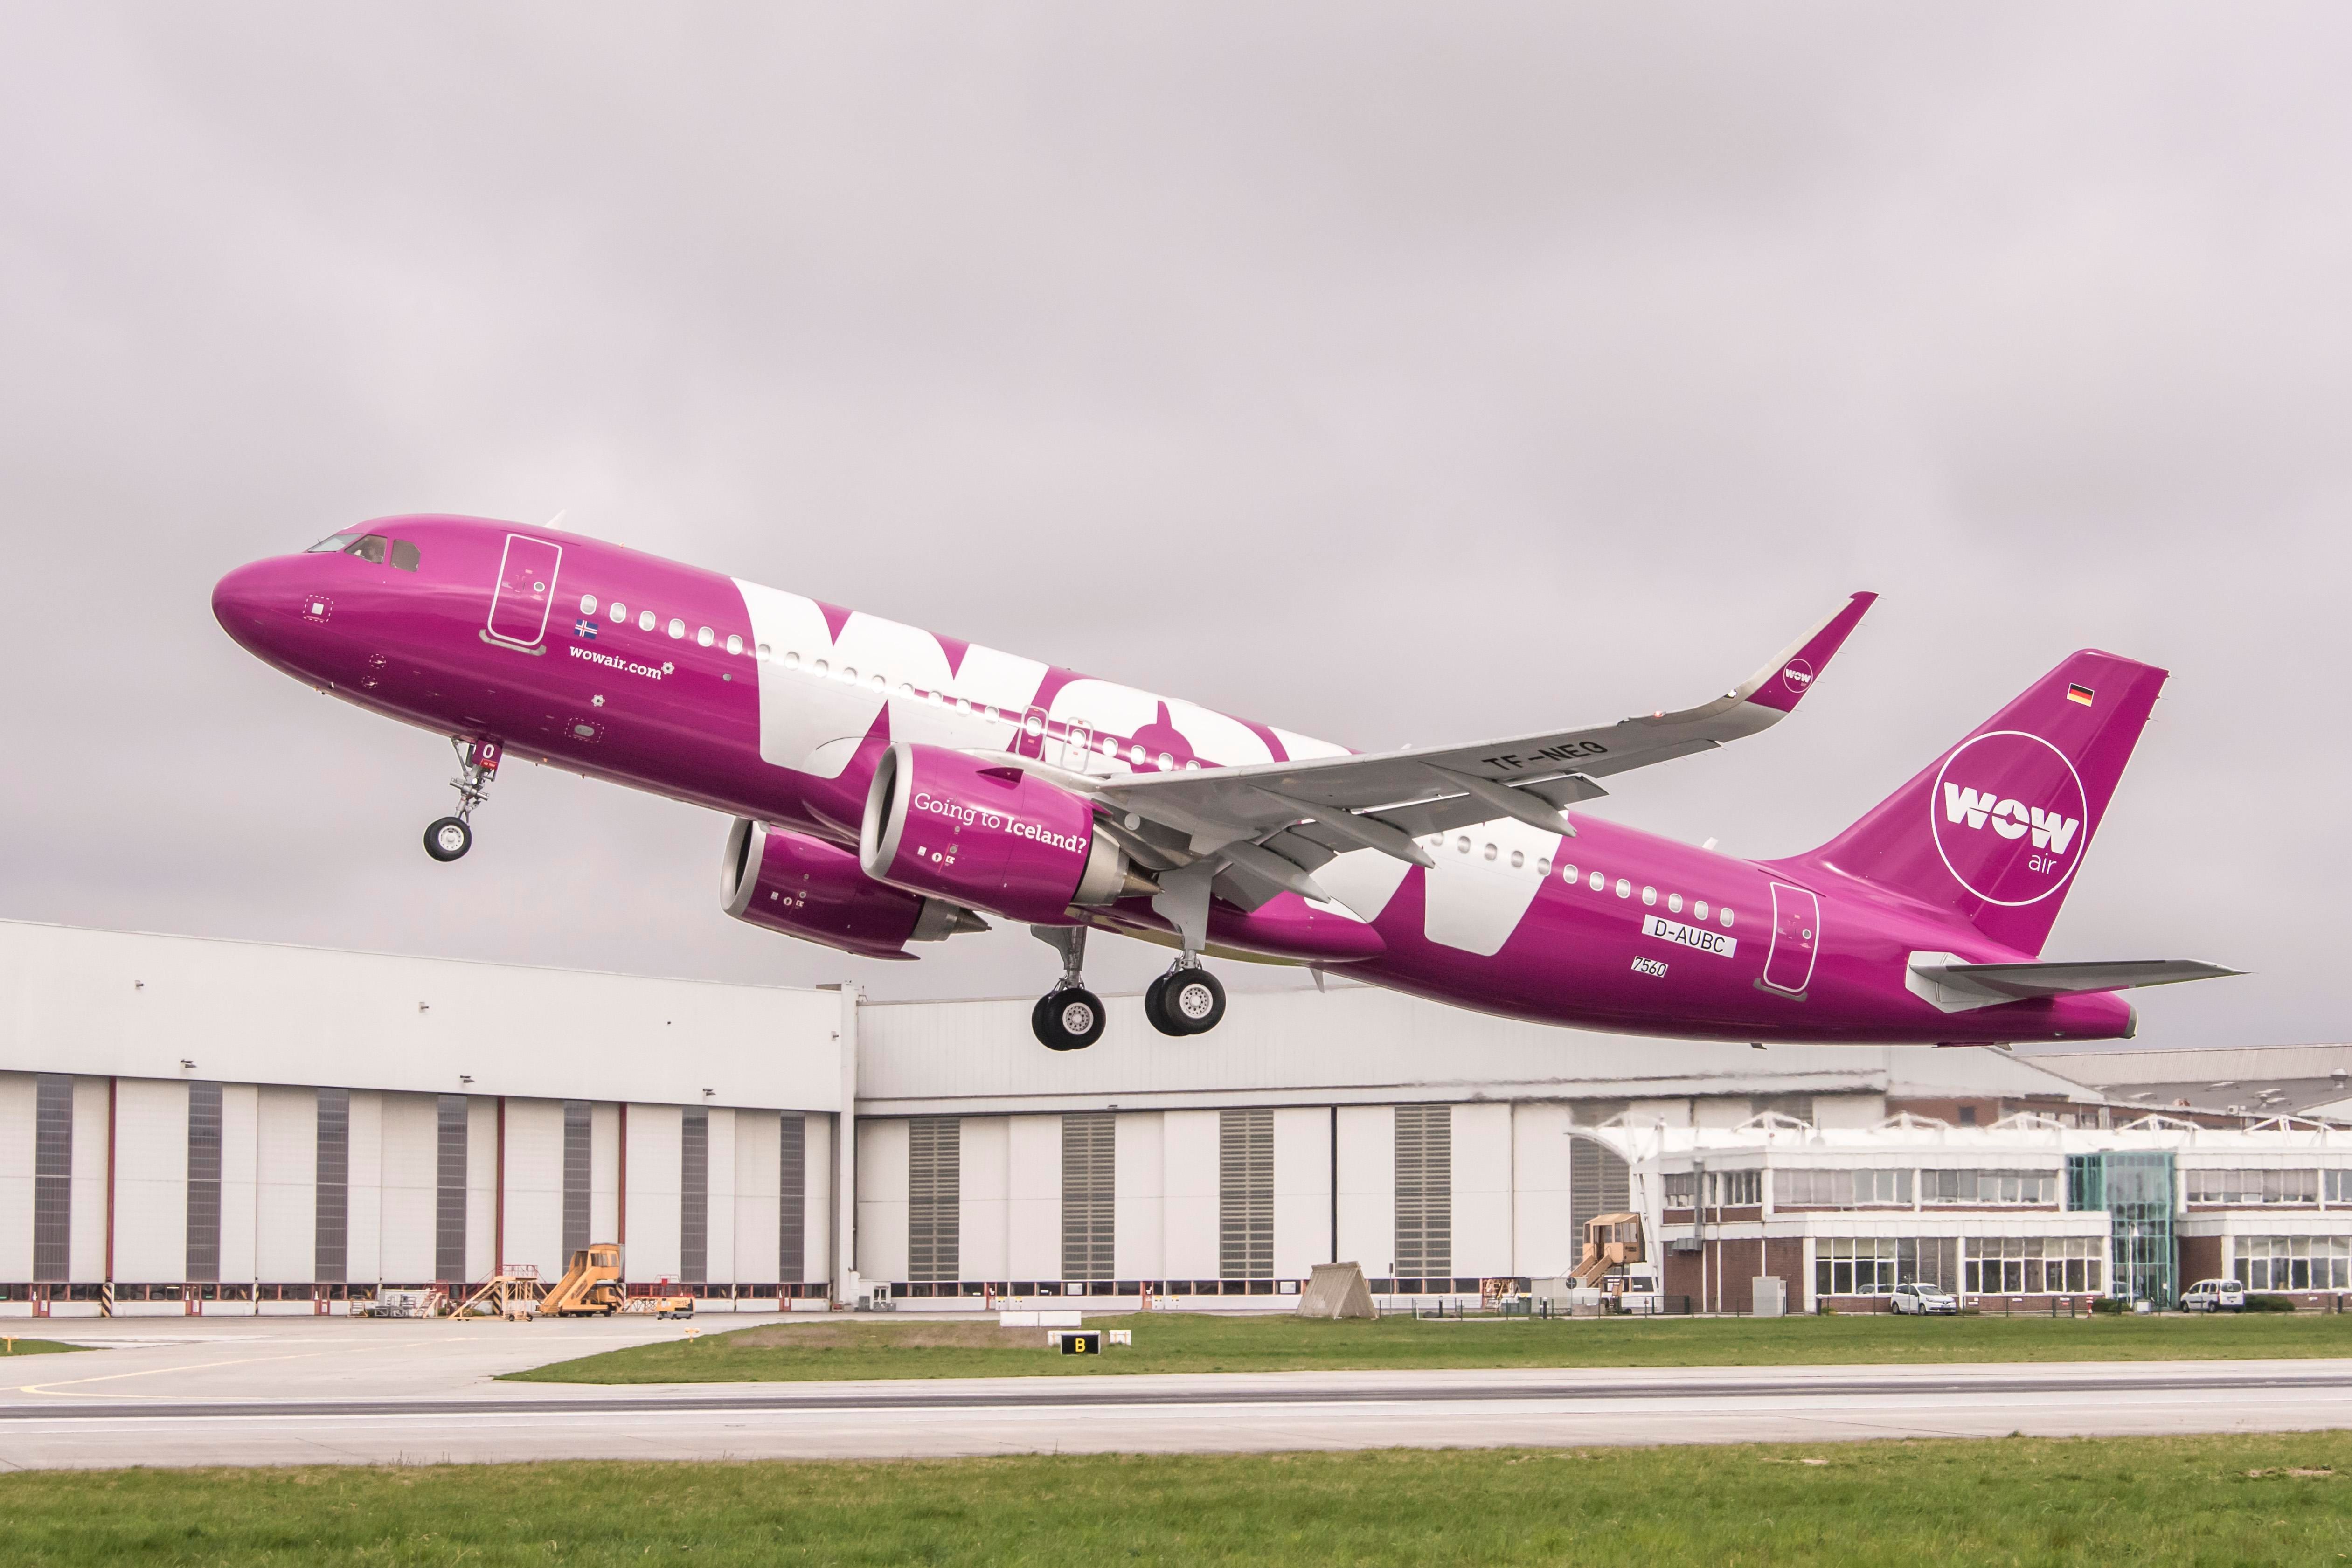 A Wow Air Airbus A320 just after take off.